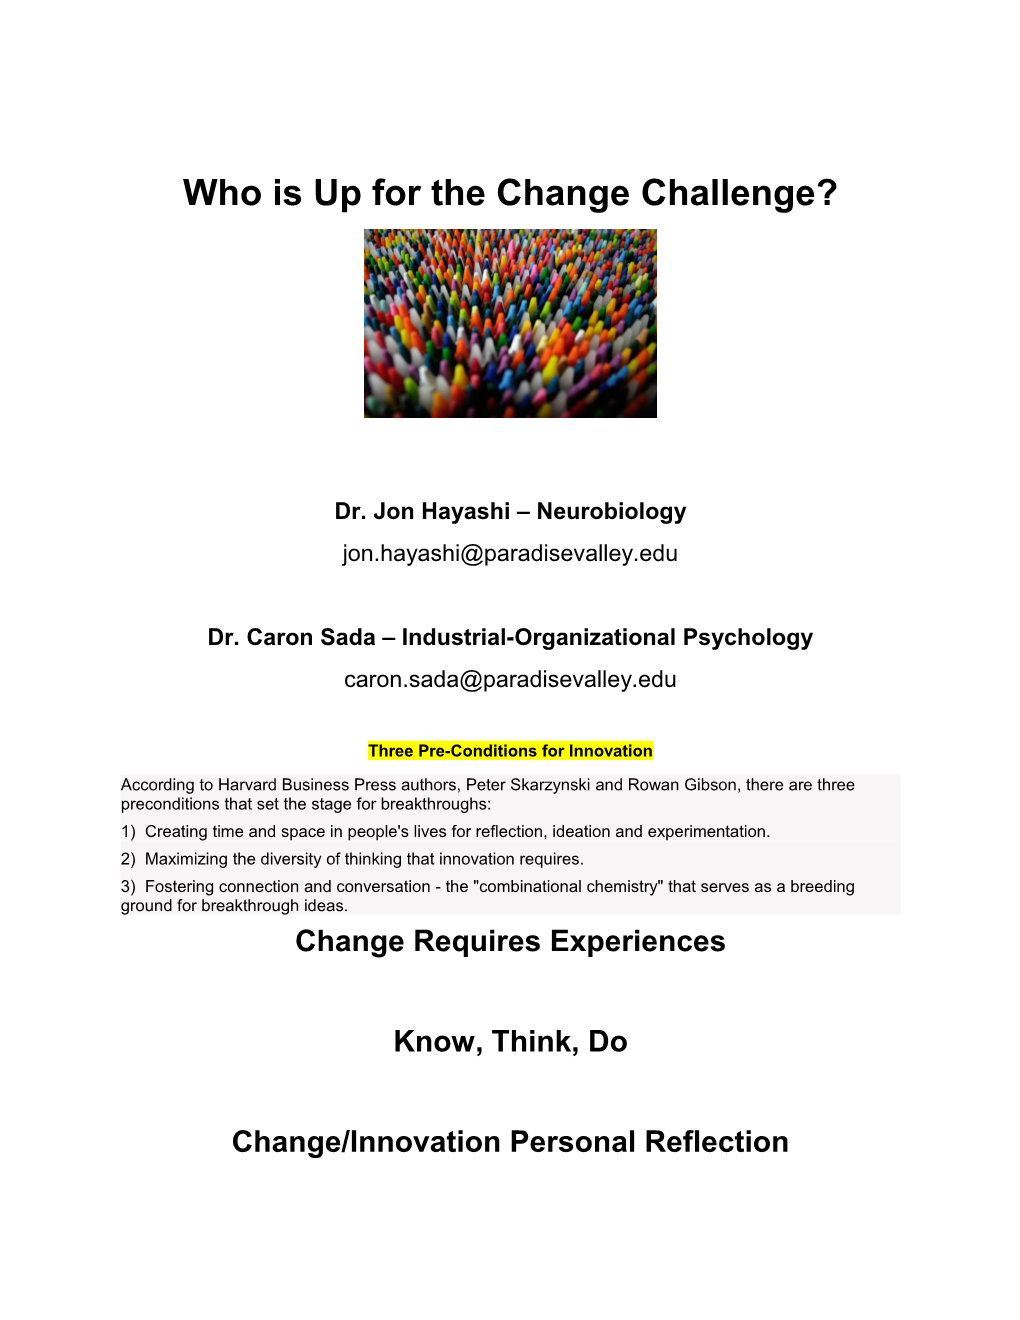 Who Is up for the Change Challenge?